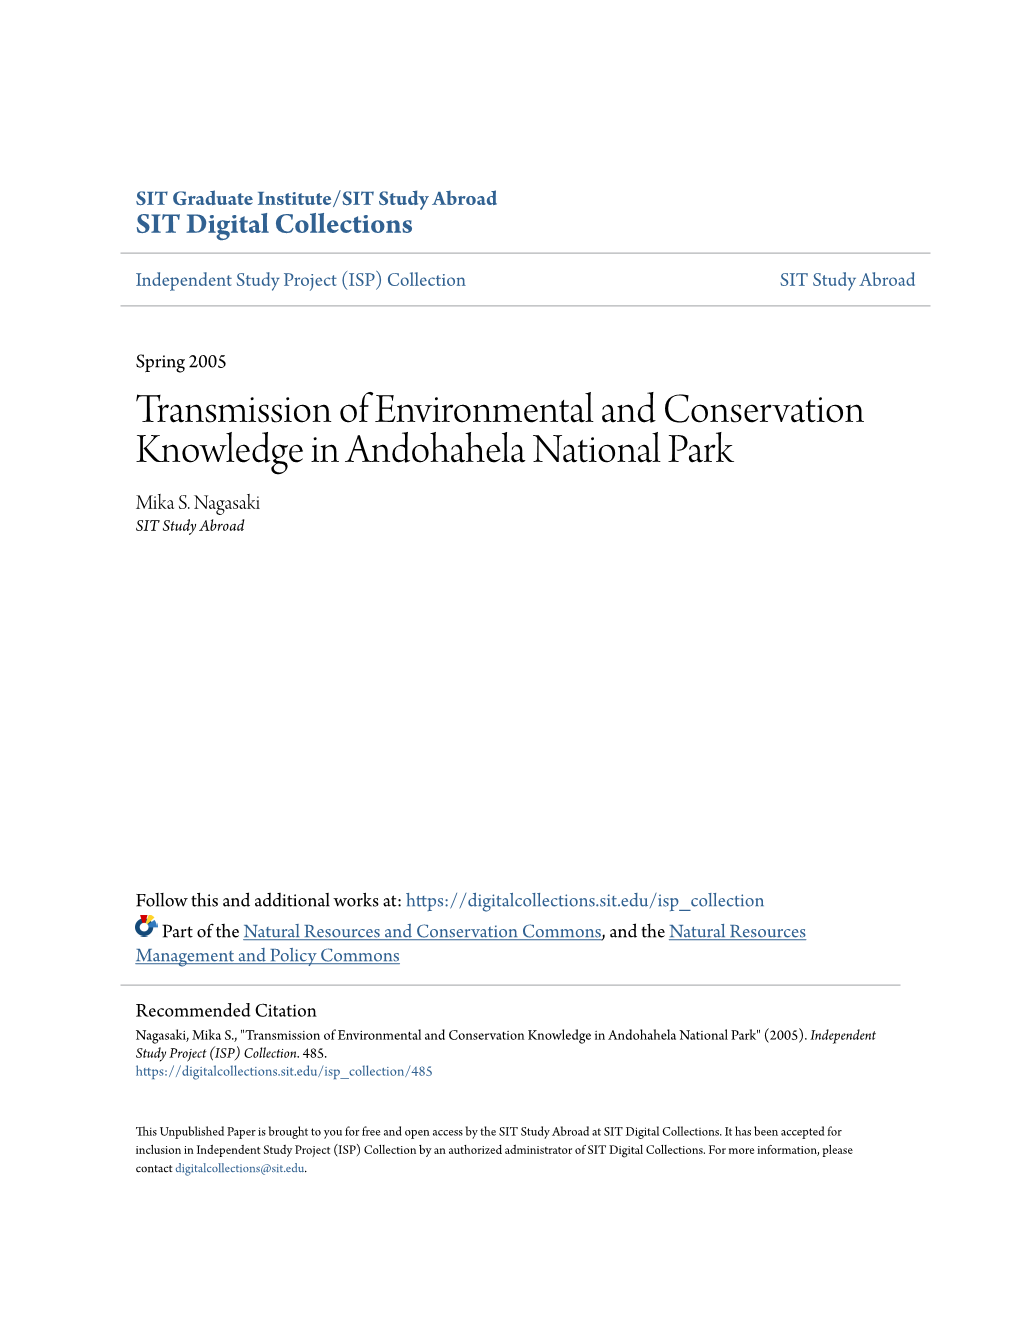 Transmission of Environmental and Conservation Knowledge in Andohahela National Park Mika S